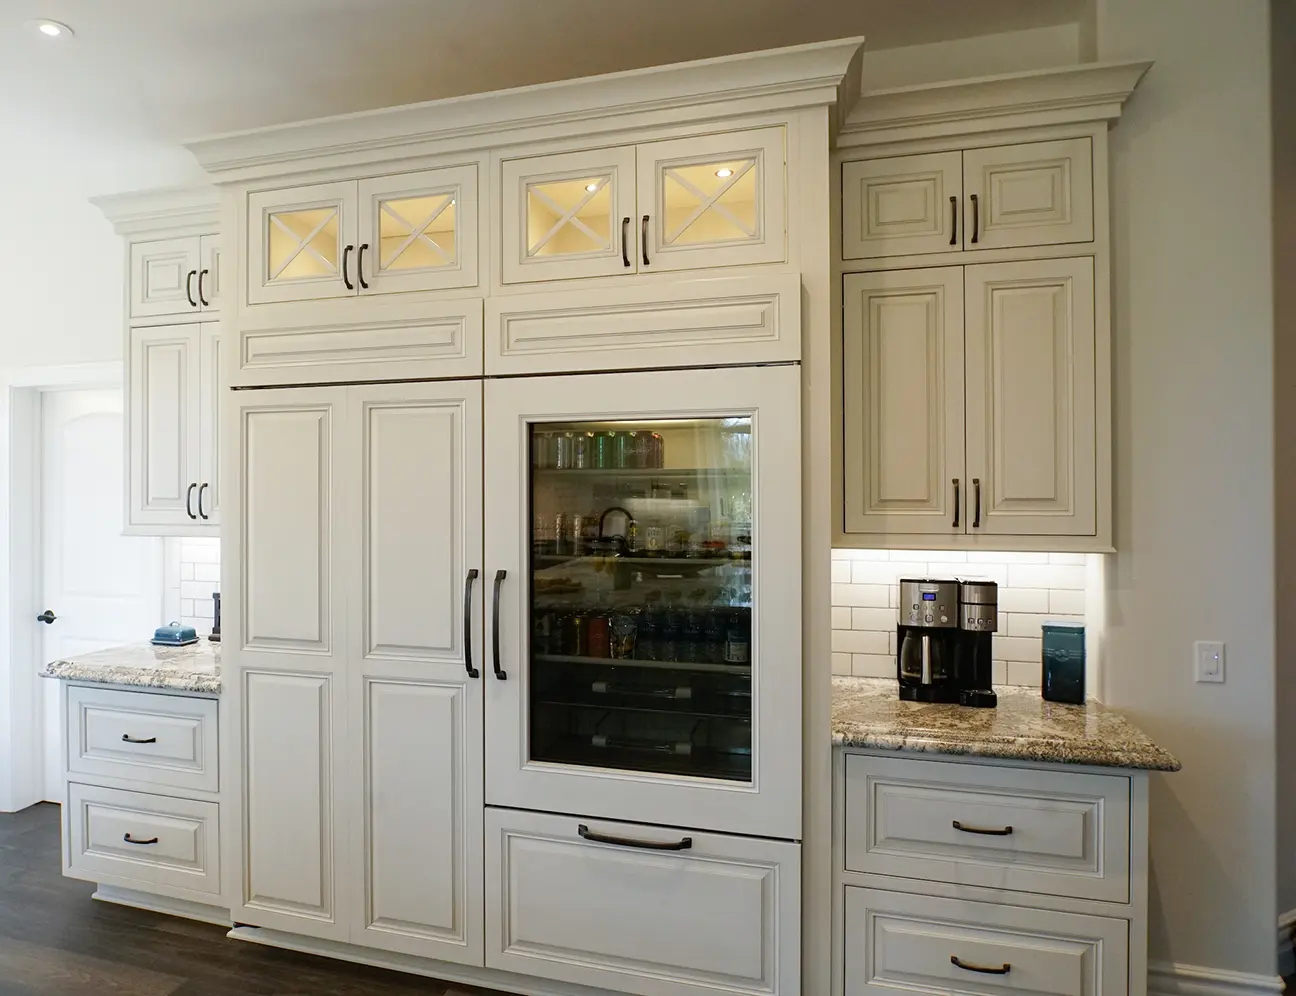 Kitchen Refrigerator with Cabinet Door Covering